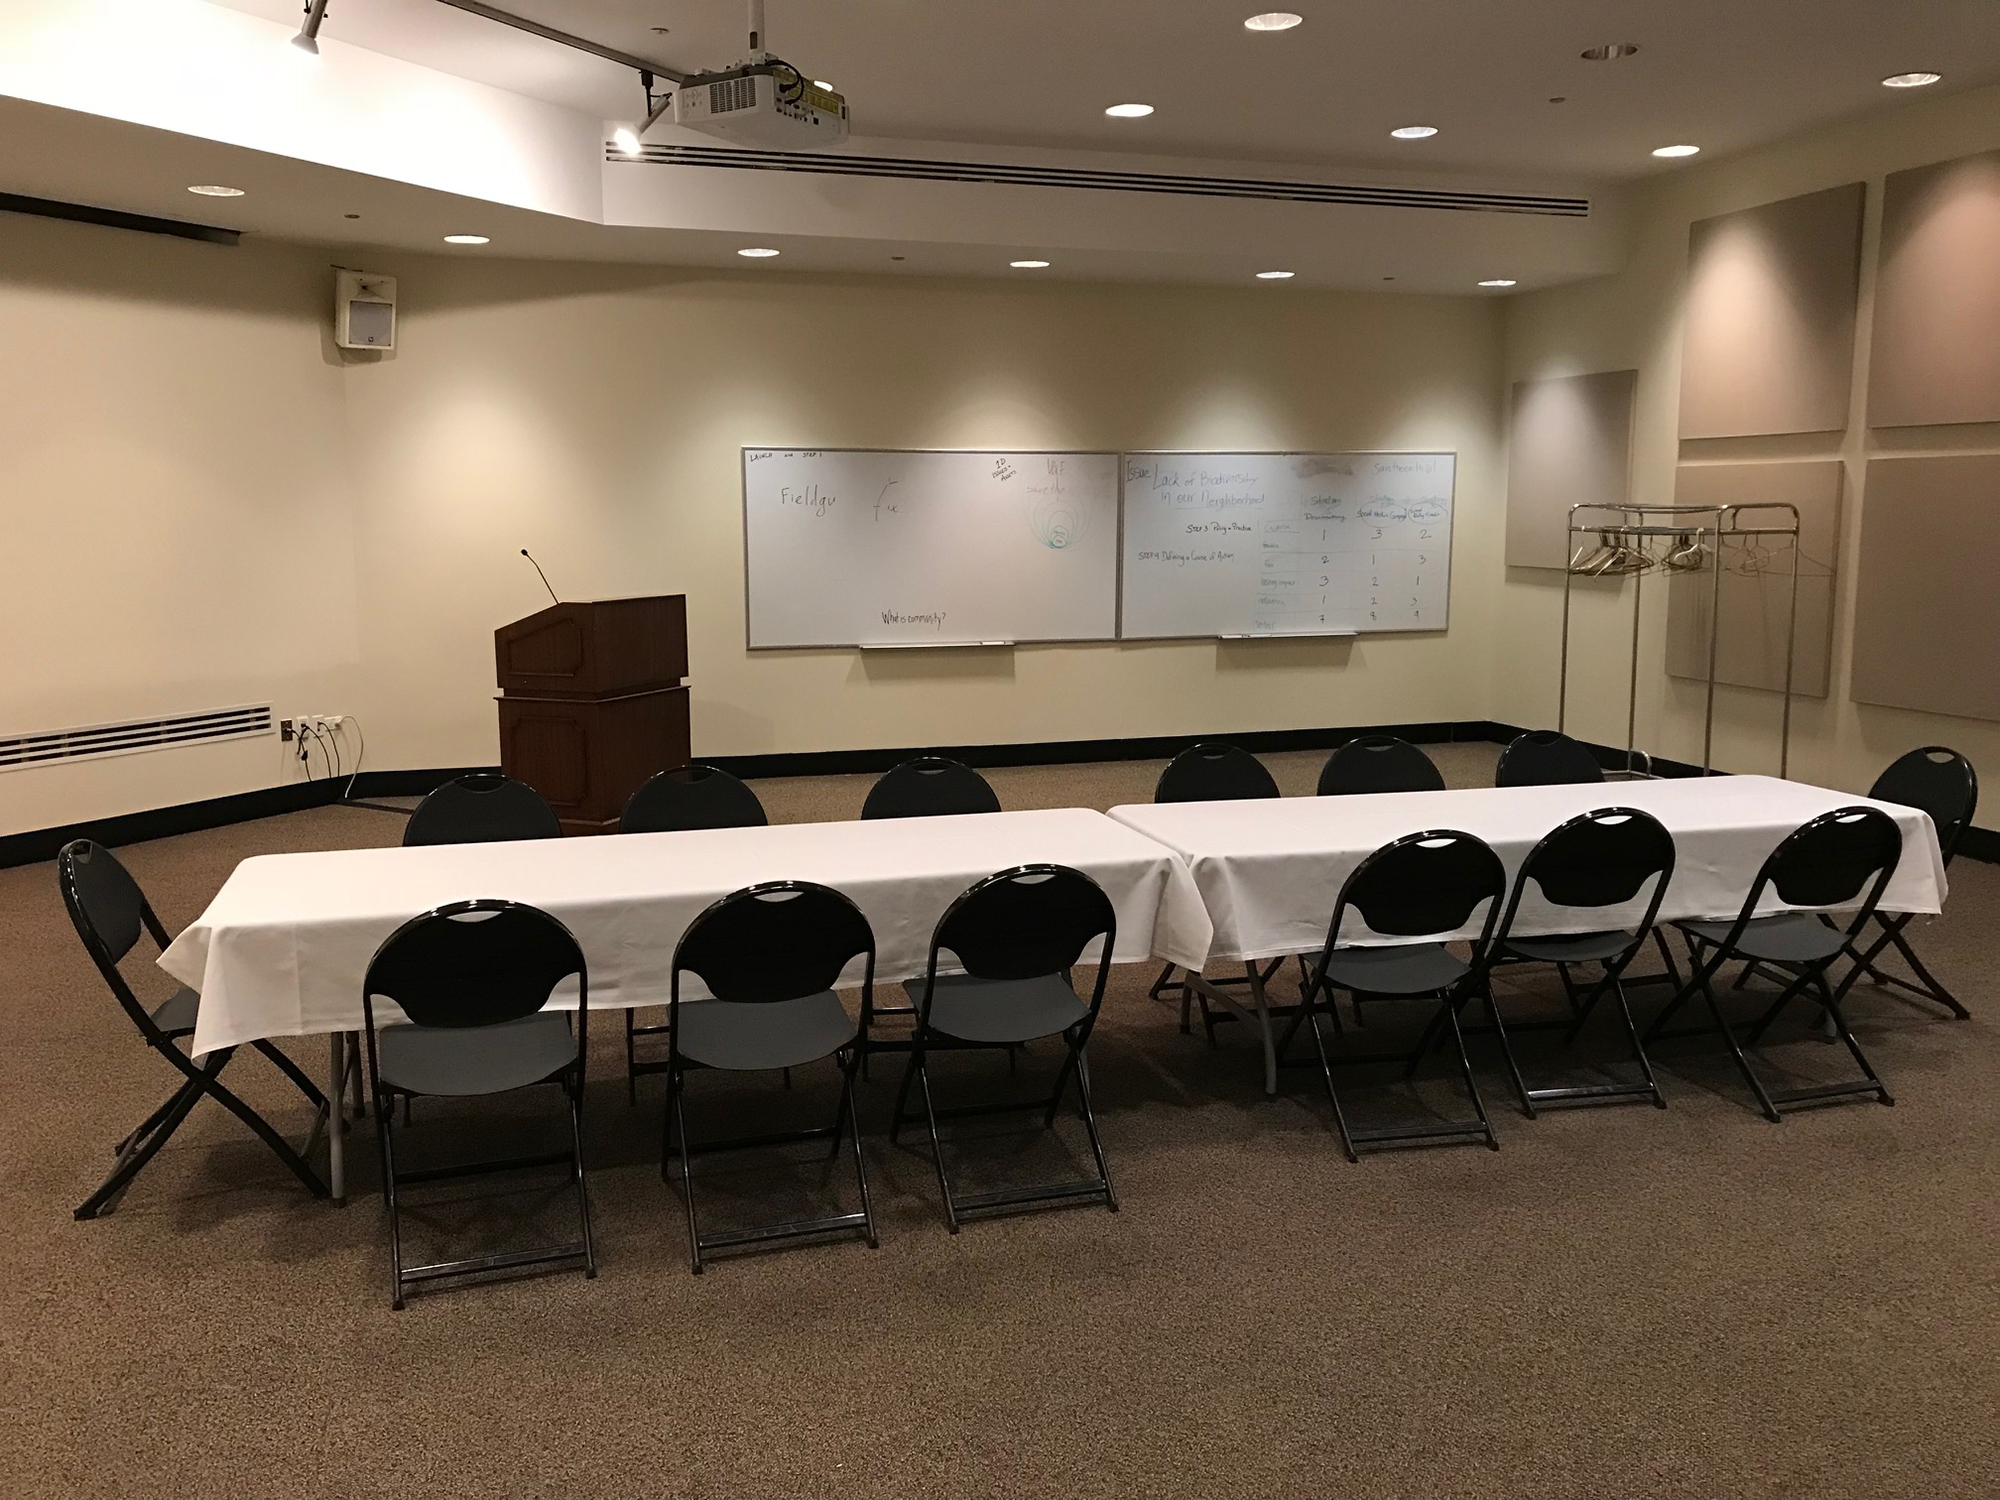 A long tables sits in the middle of Lecture Hall II. The table is set for 14 guests and topped with a white tablecloth. A podium, two whiteboards, and empty coat rack are visible in the back. A projector hangs overhead.